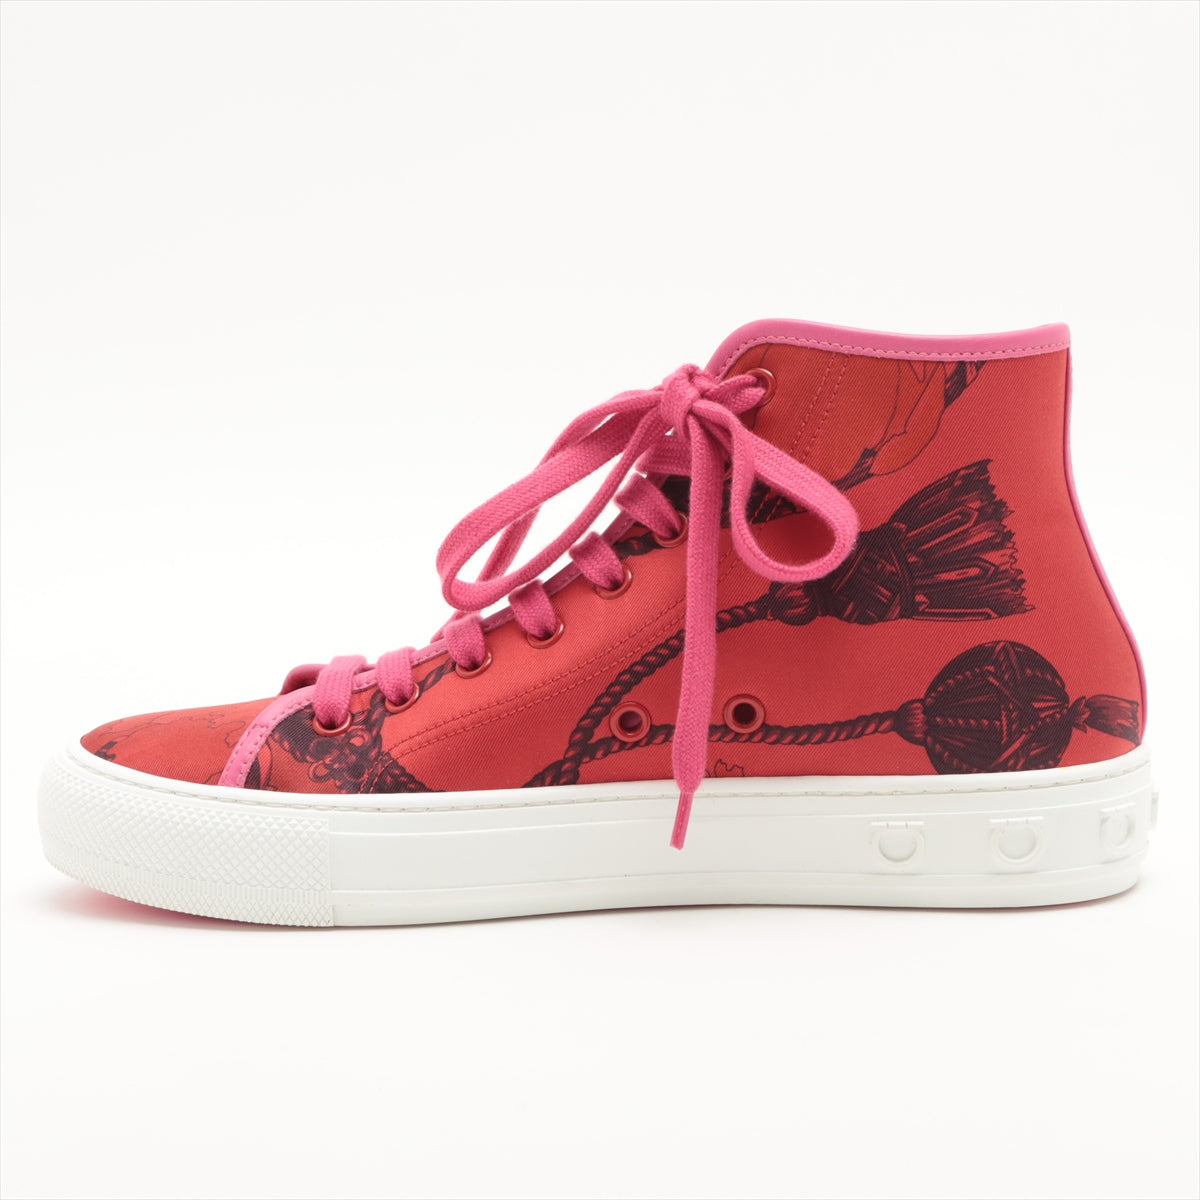 Ferragamo Leather x fabric High-top Sneakers 8C Ladies' Red MAFALDA 1 Replacement Laces Included